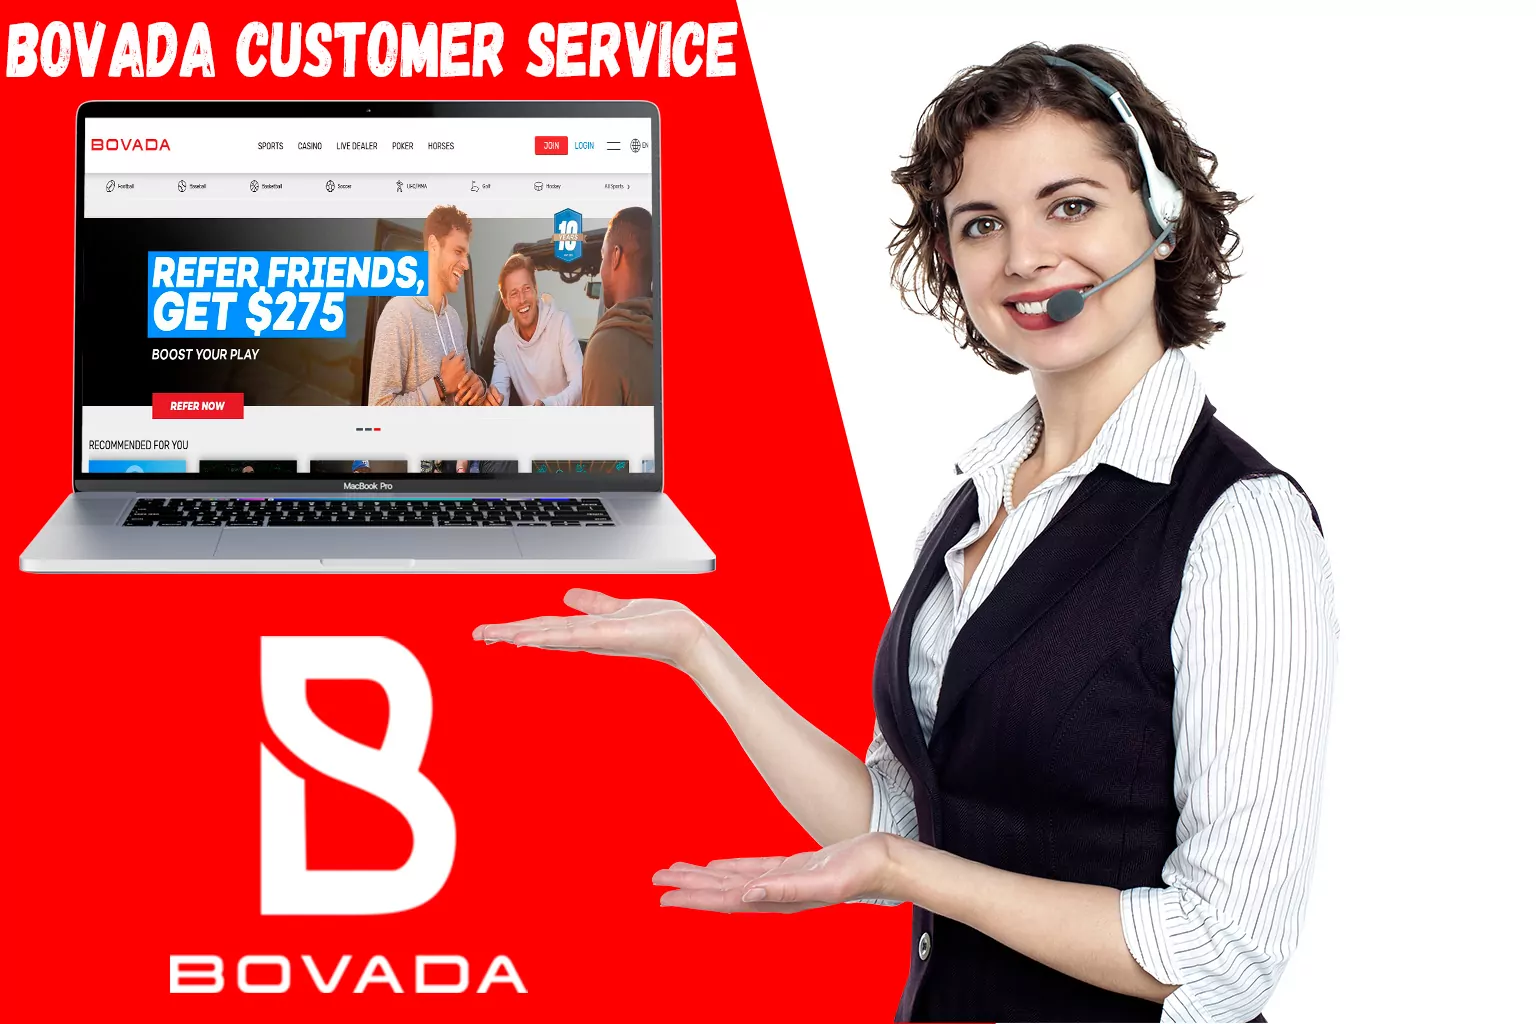 Bovad's support will be helpful for those who have problems using betting services.